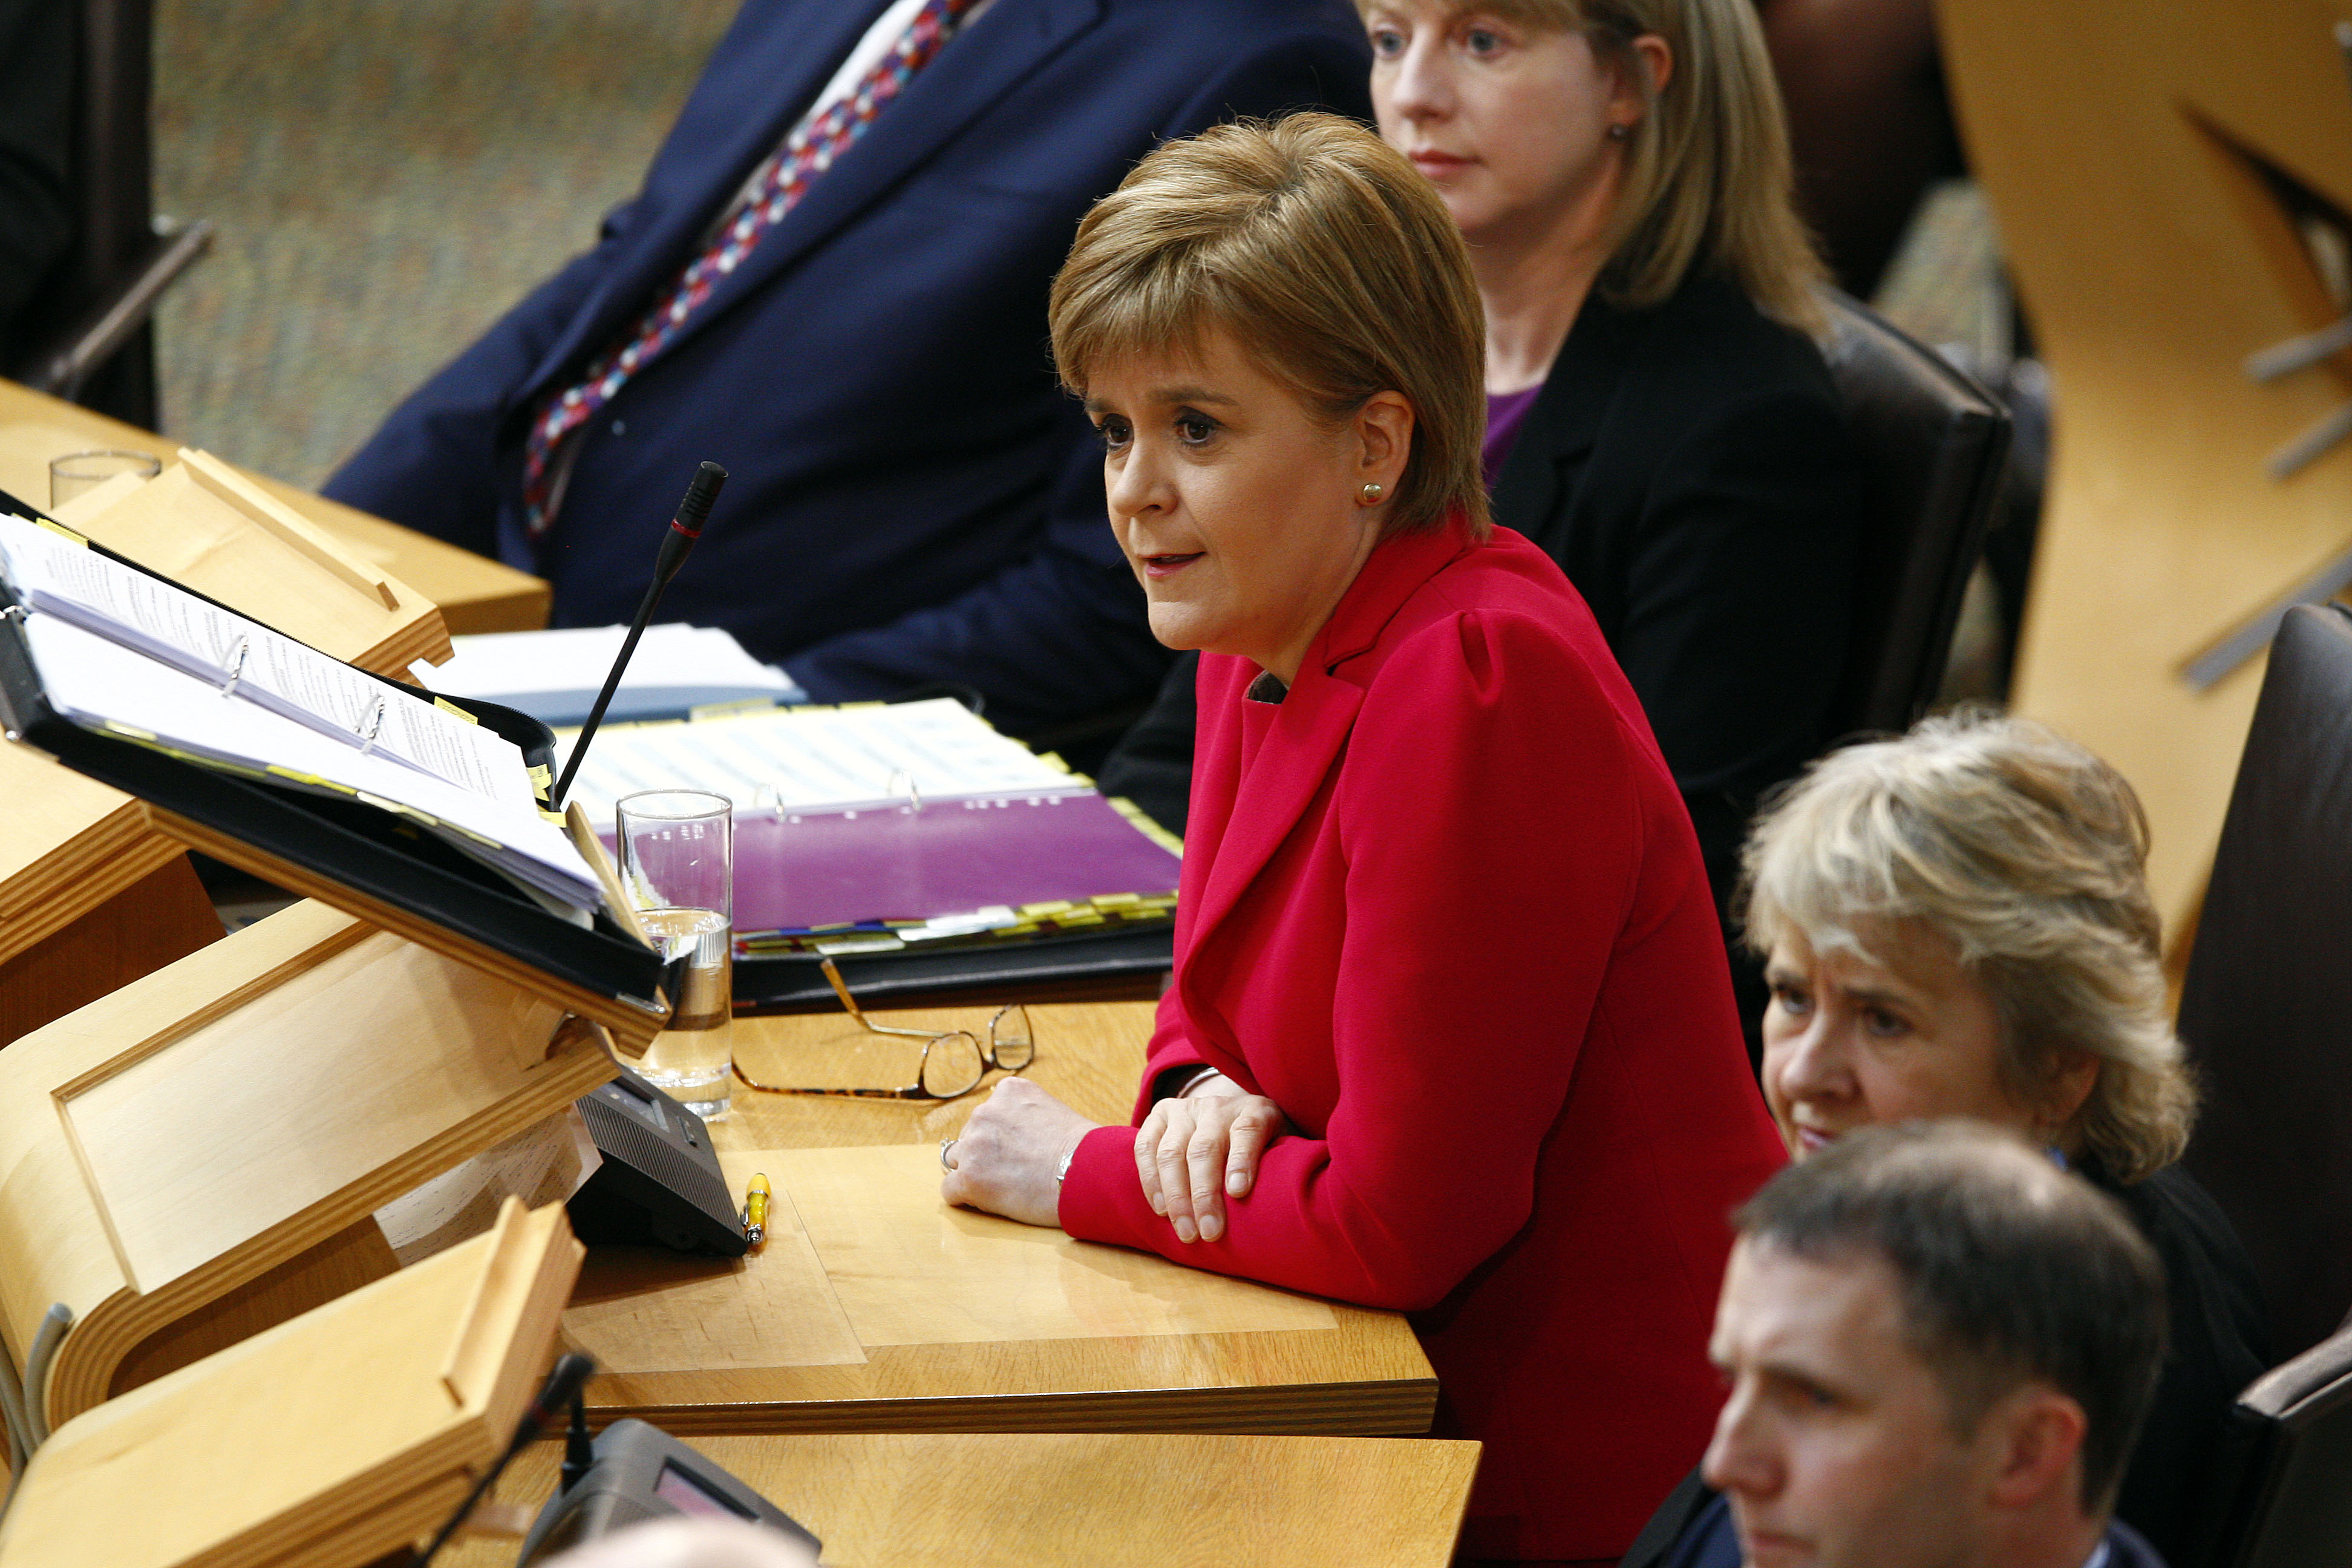 Nicola Sturgeon, First Minister of Scotland, speaking at the Scottish Parliament (by the Scottish Parliament)